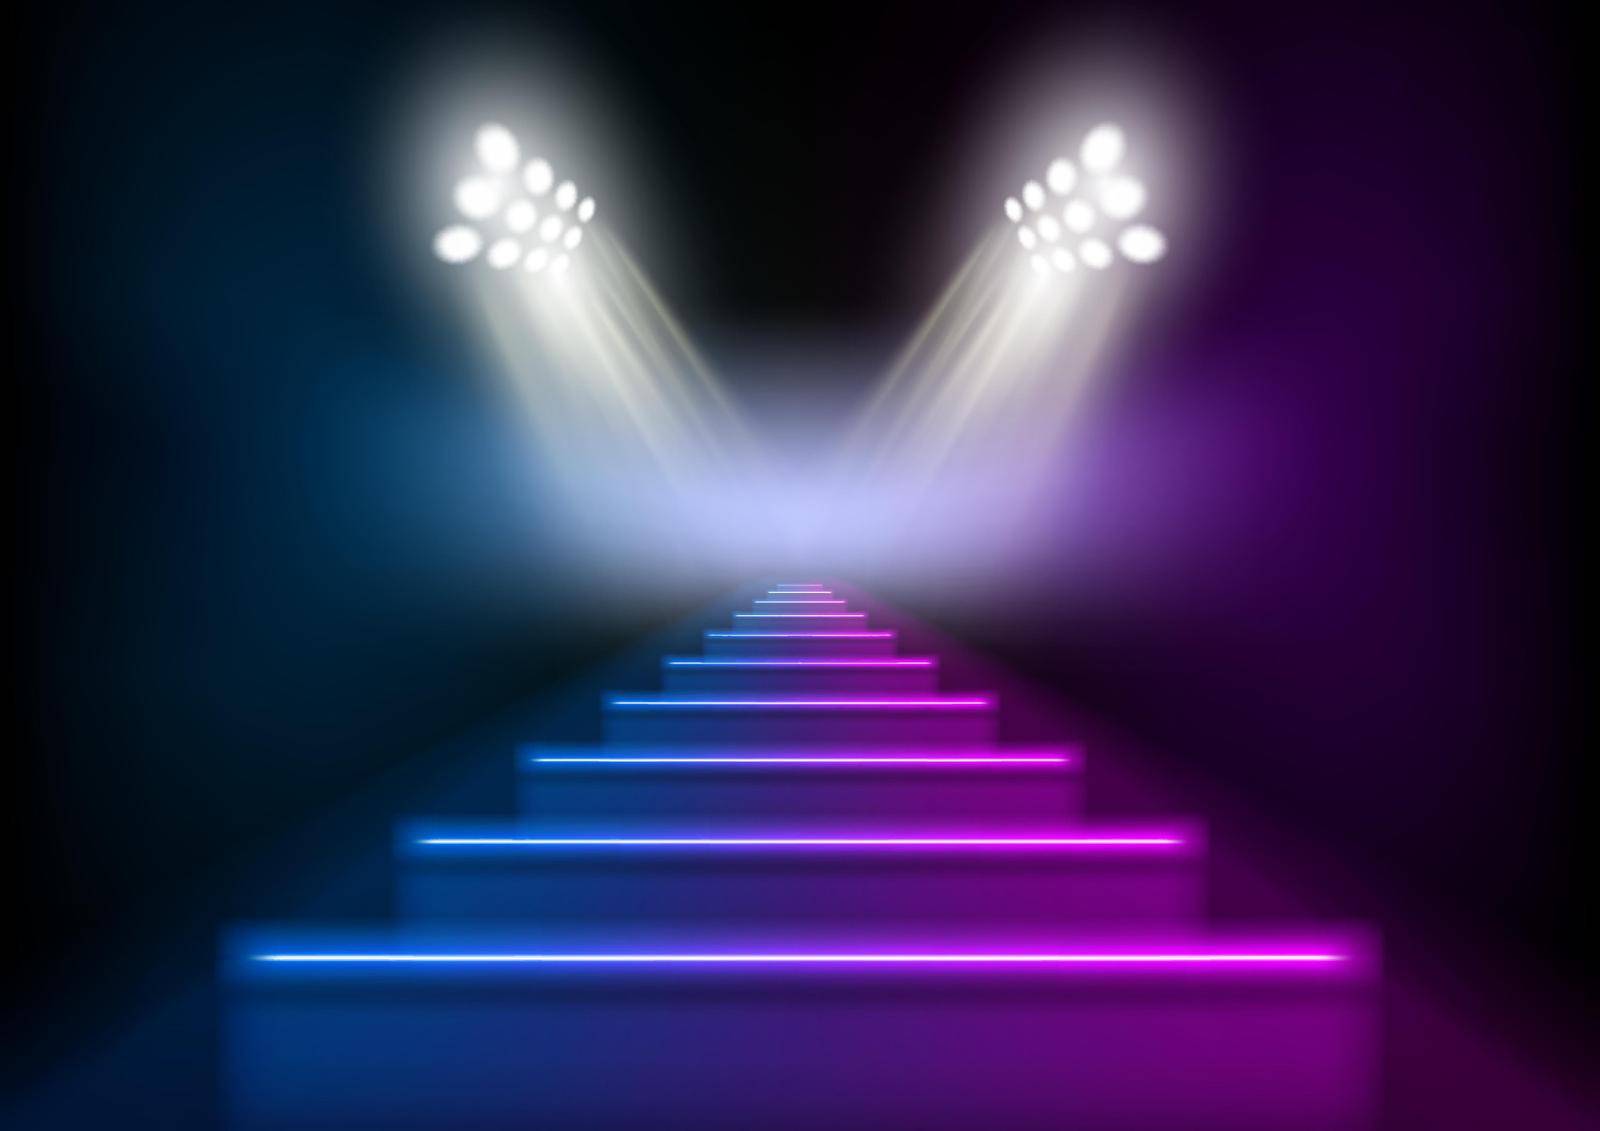 3D Glowing Neon Stairs Illuminated By Spotlights. EPS10 Vector